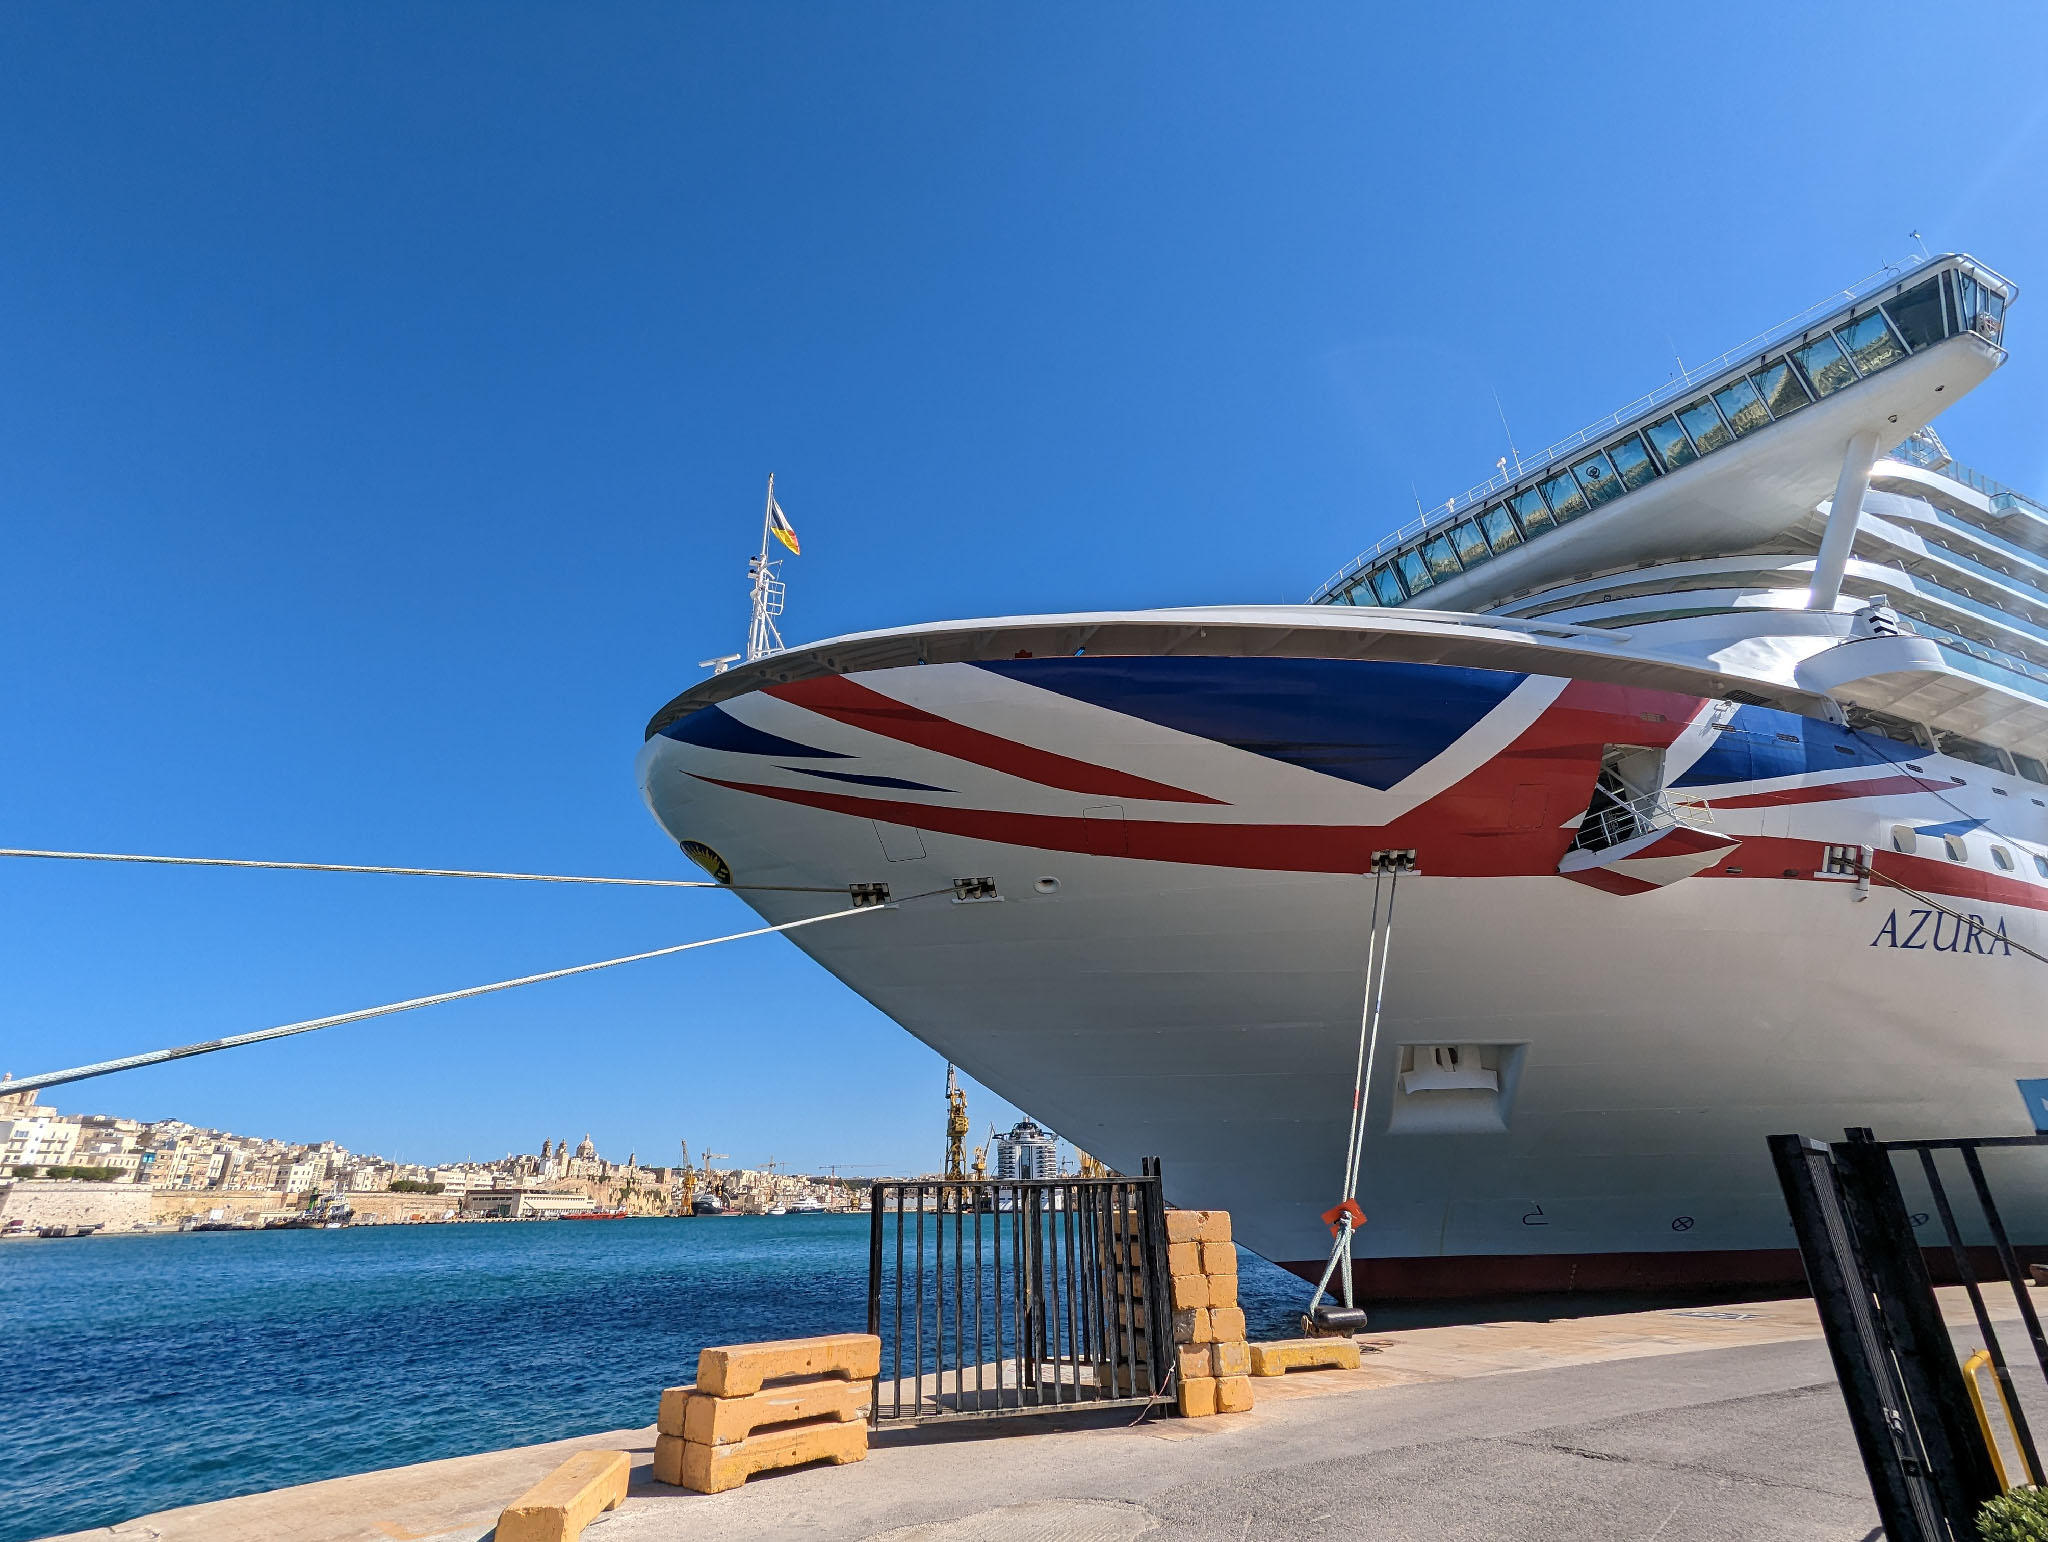 A cruise ship docked at port; we're close to it with its prow decorated with a Union Flag and the word Azura on it. A bright blue sky and sunshine above.